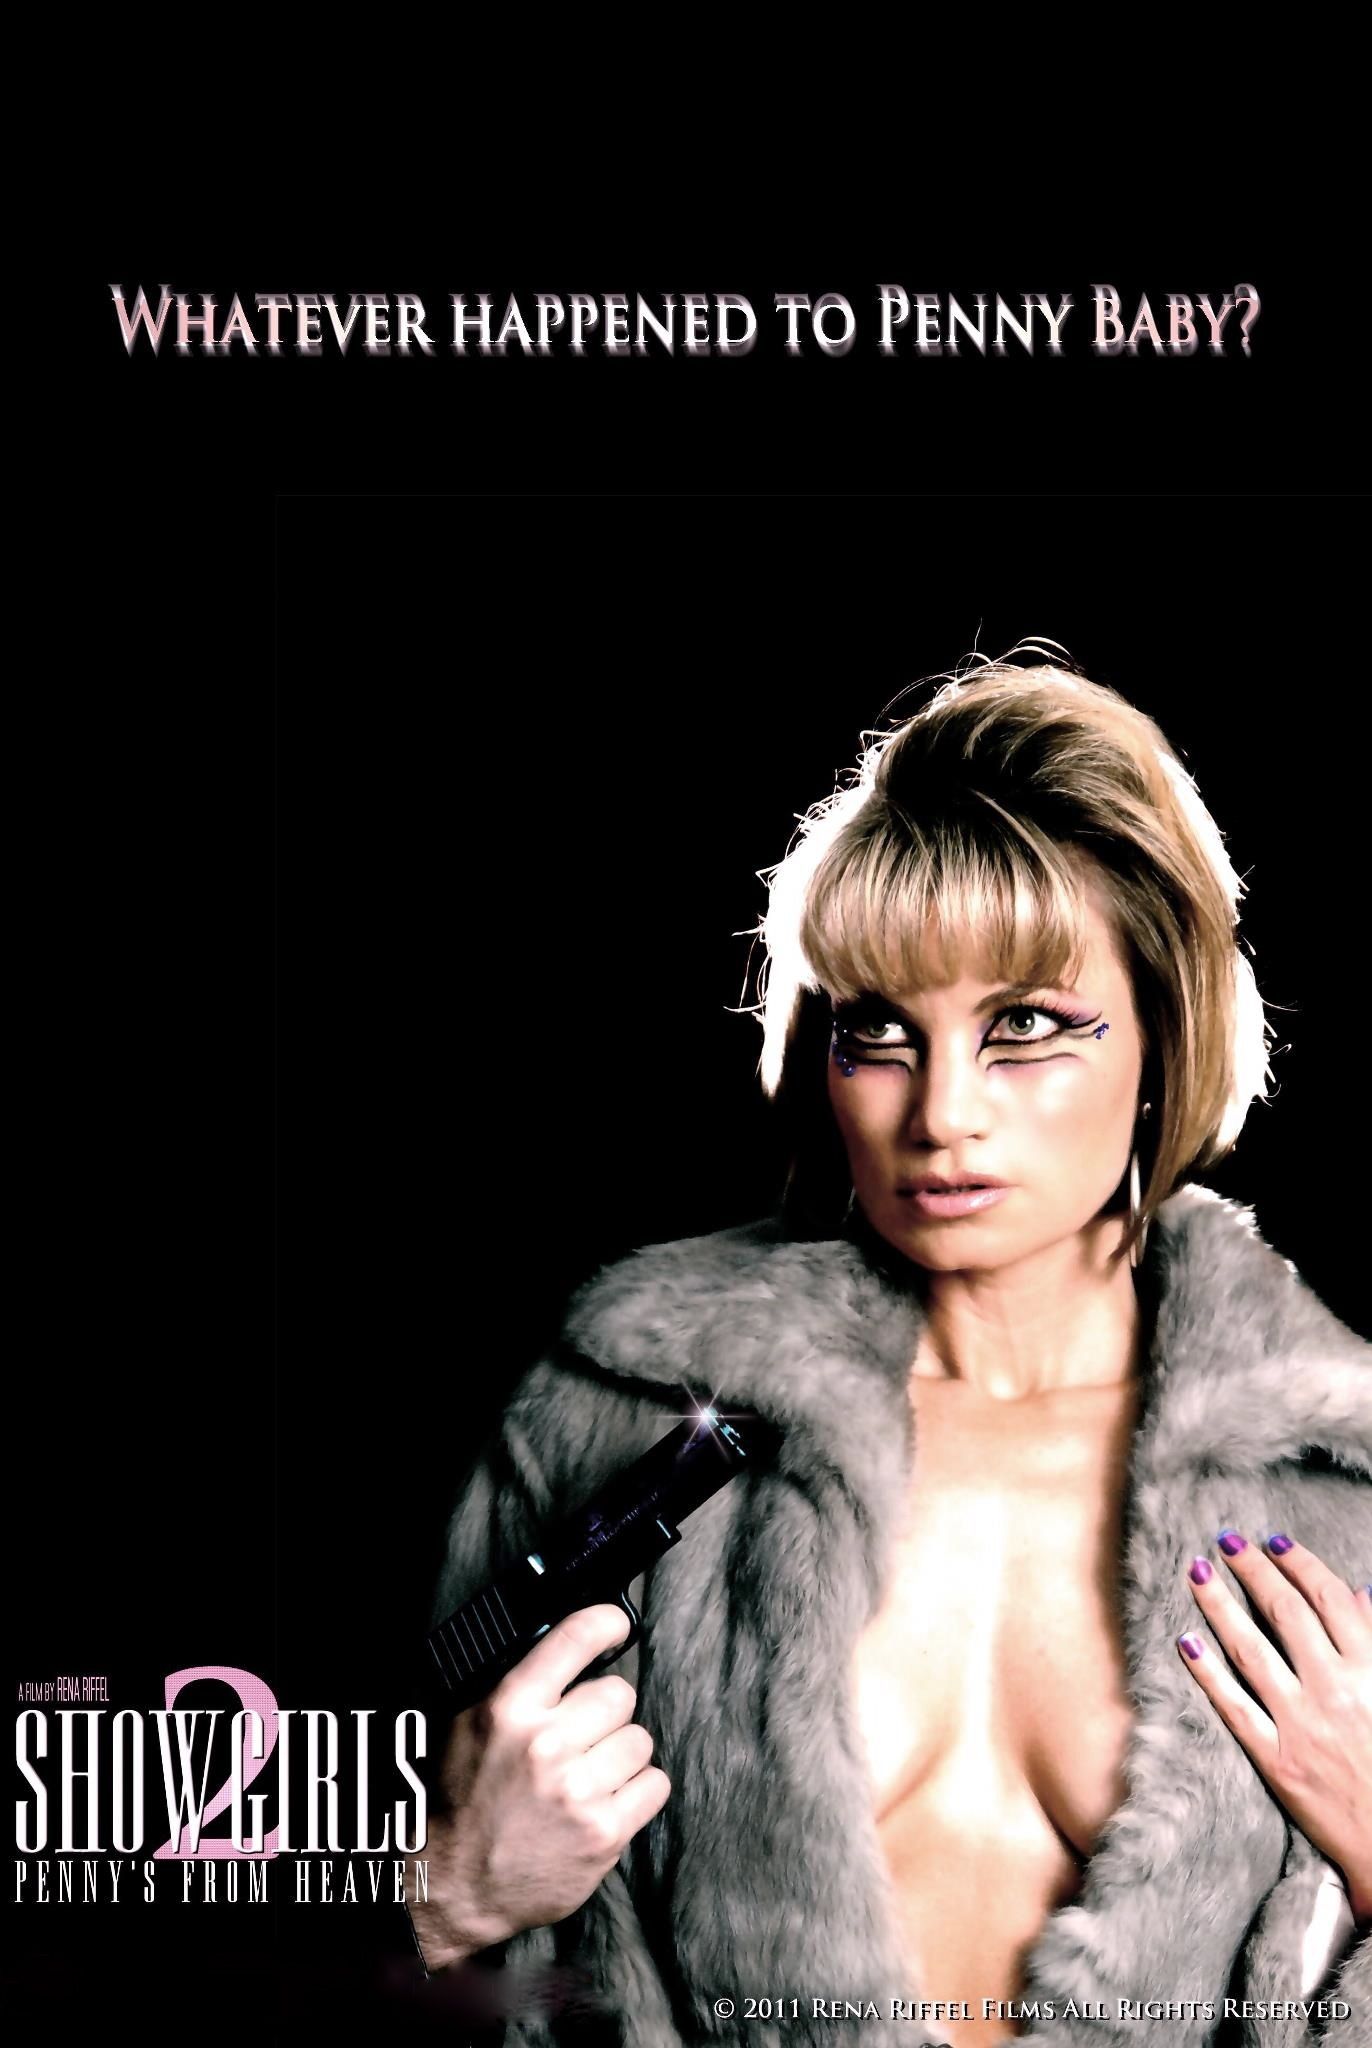 Showgirls 2: Penny's from Heaven - Film (2012)